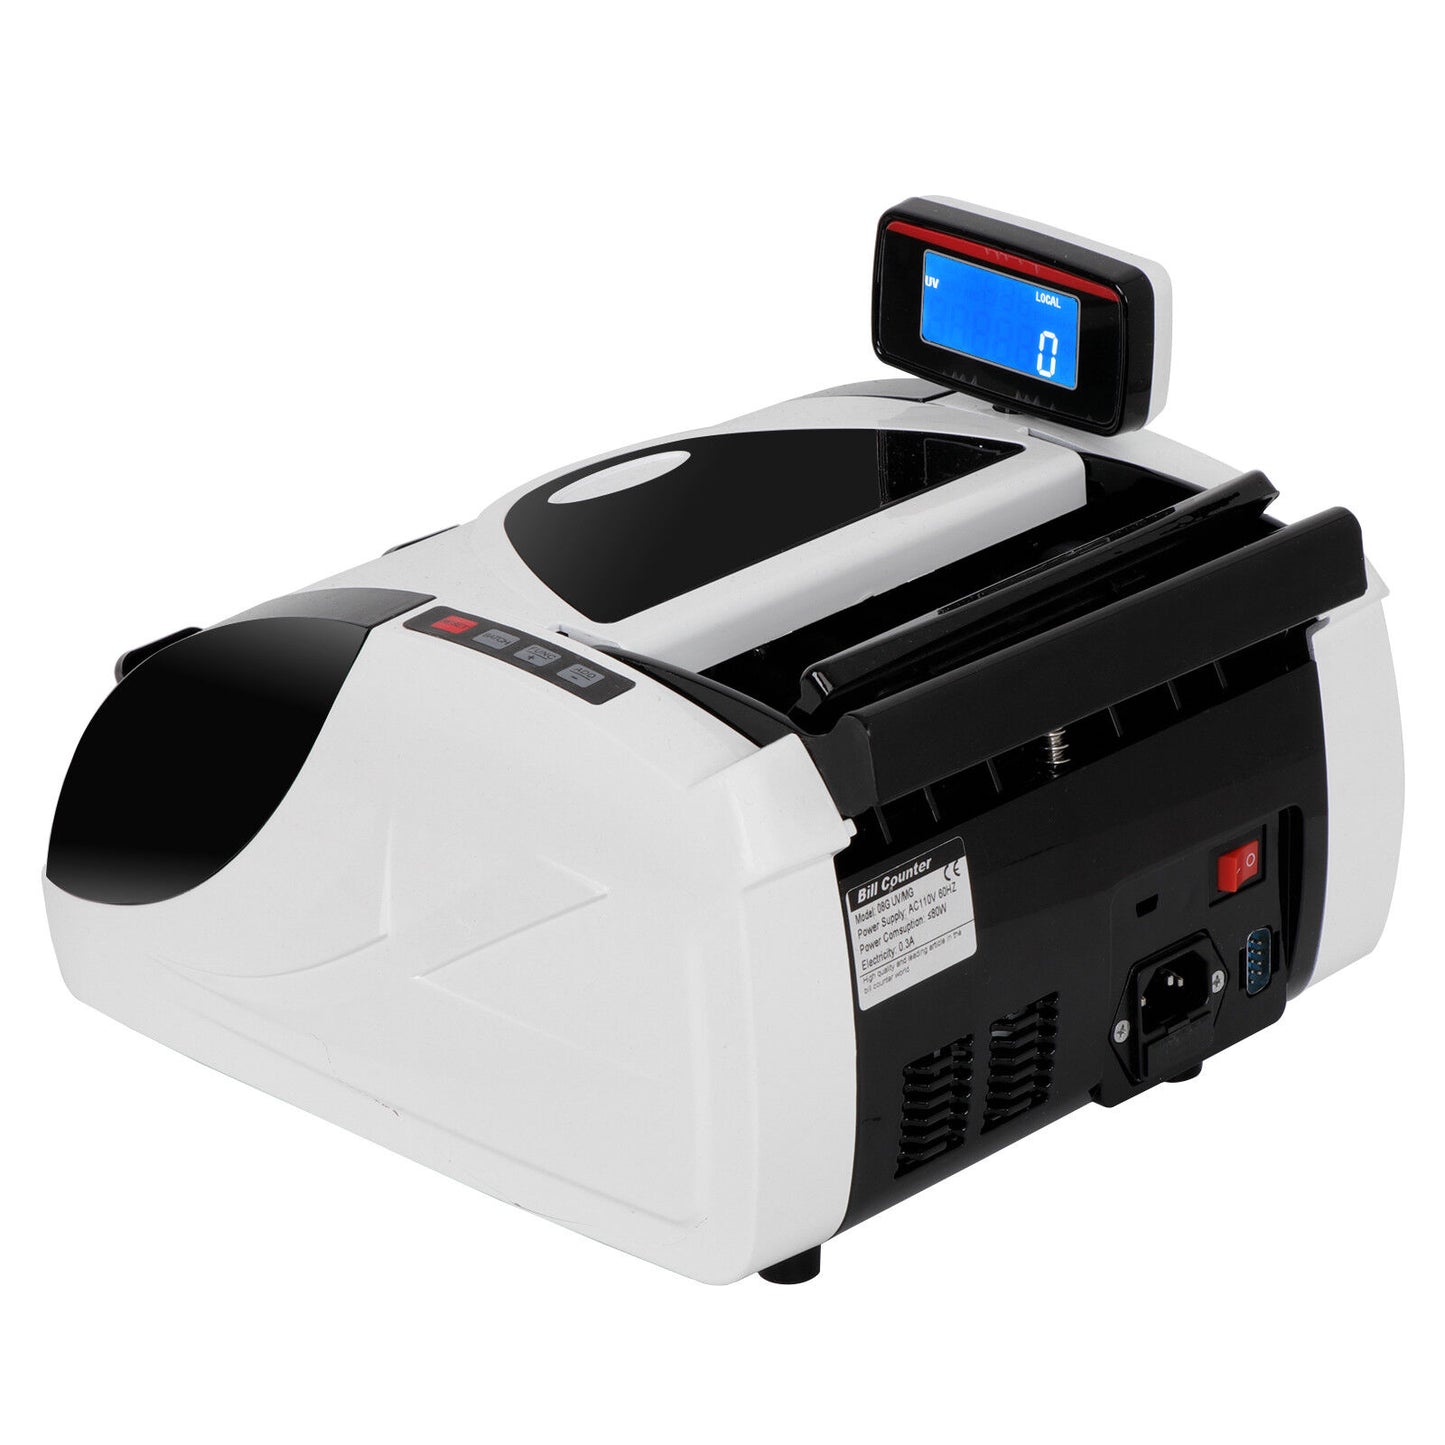 Counterfeit Detector UV MG Cash Money Bill Currency Counter Counting Machine